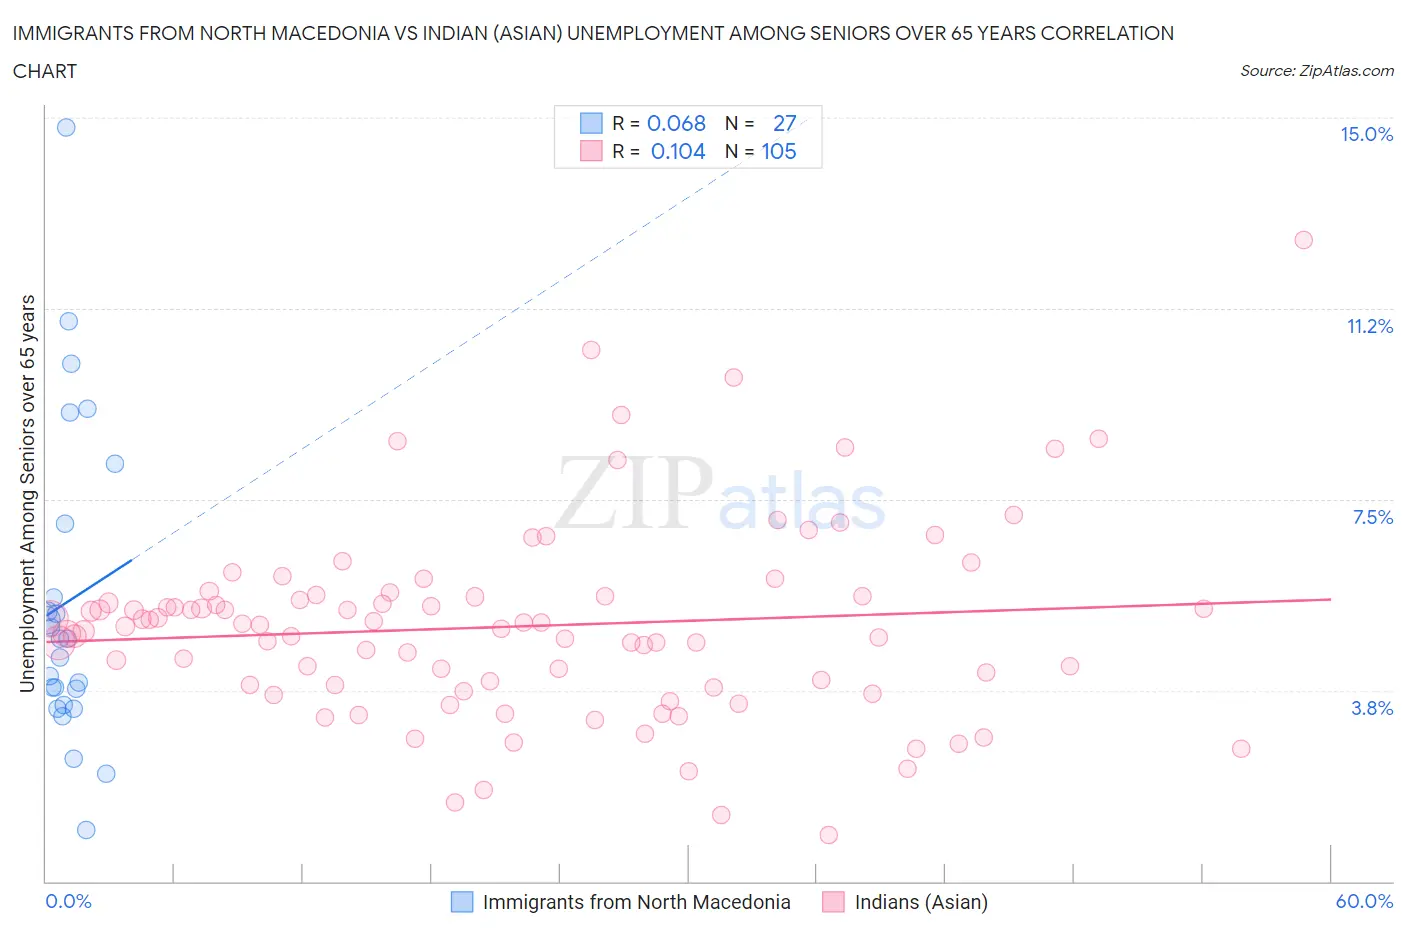 Immigrants from North Macedonia vs Indian (Asian) Unemployment Among Seniors over 65 years